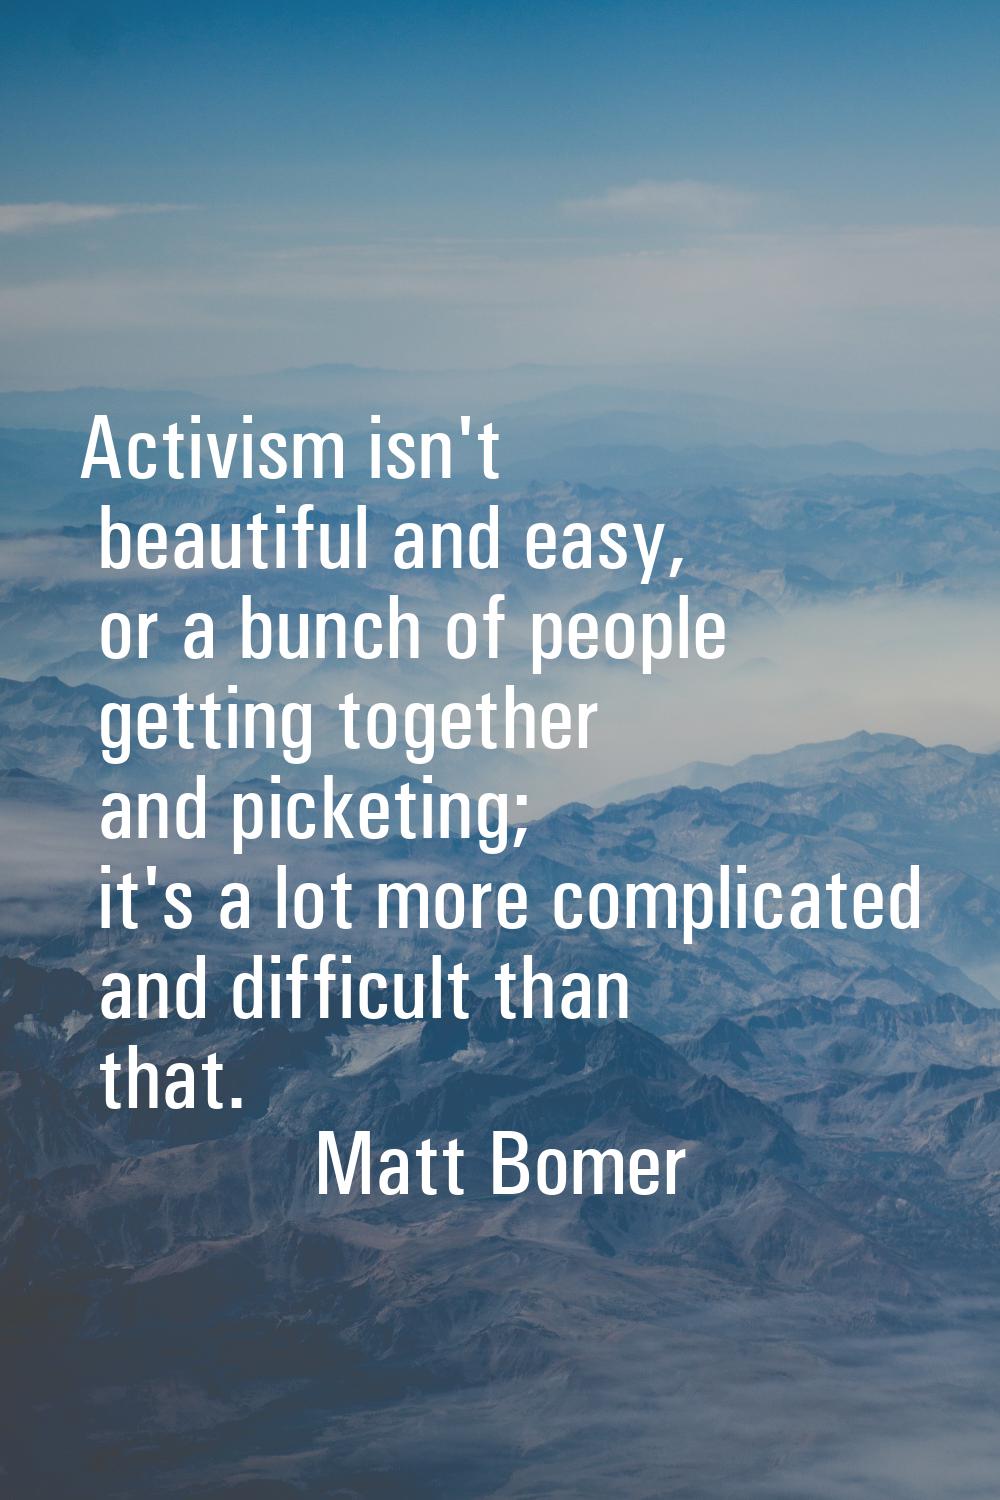 Activism isn't beautiful and easy, or a bunch of people getting together and picketing; it's a lot 